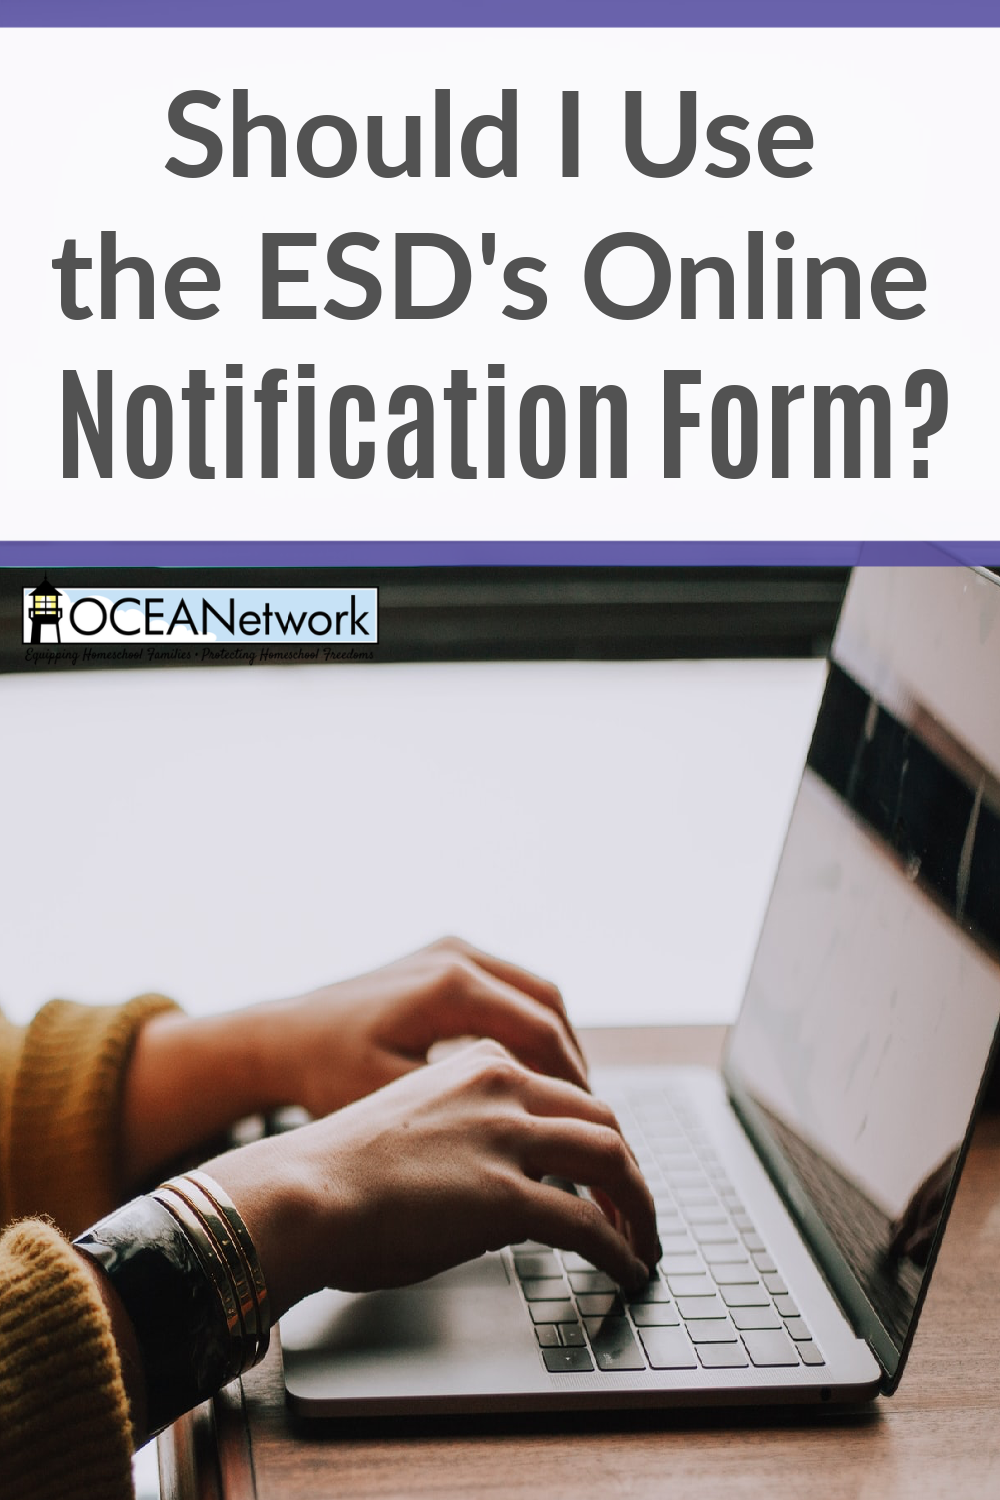 In Oregon, homeschool parents are required to send in a letter of intent. Many ESDs ask parents to use their online notification forms instead of mailing in letters. See why OCEANetwork recommends not using the ESD online forms in lieu of a letter of intent to homeschool. 